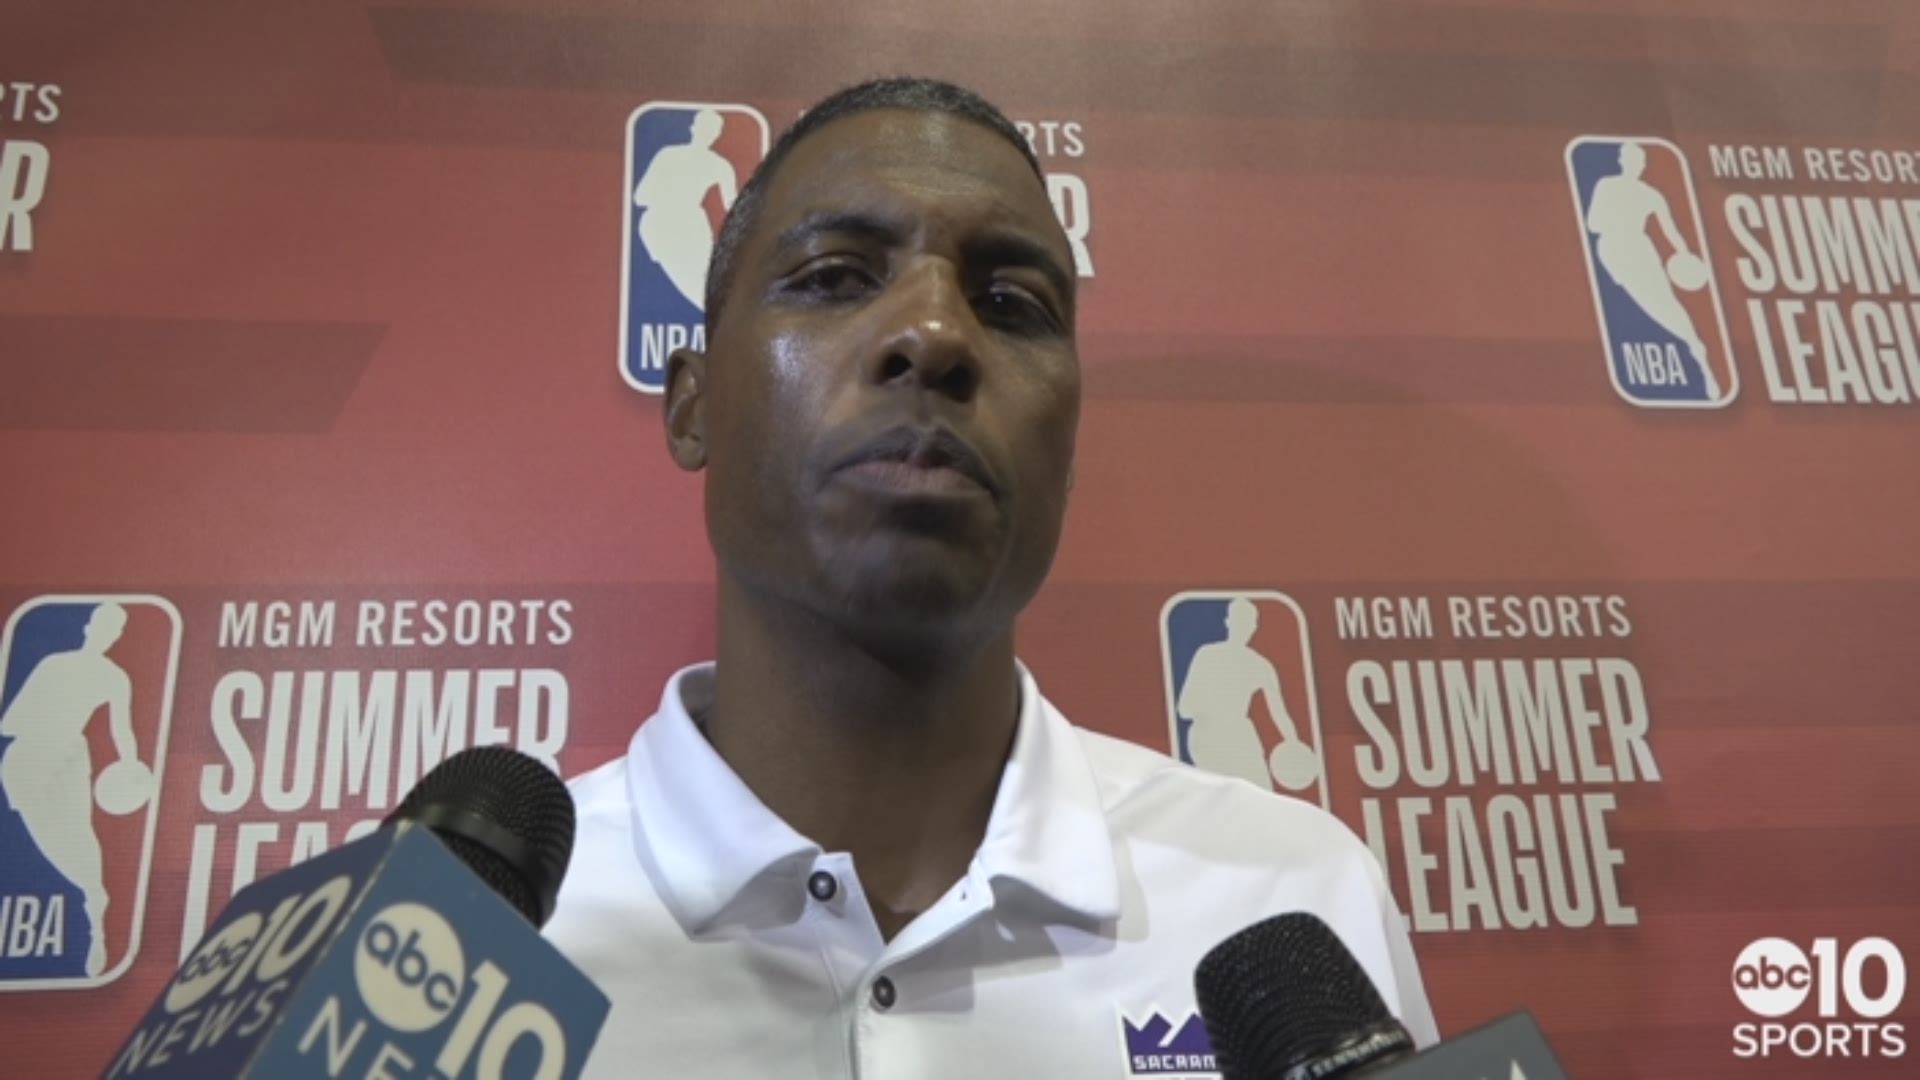 Following the Kings summer league defeat to the Los Angeles Clippers, Assistant Coach Larry Lewis talks about the team itching for a win, turnovers and resting Harry Giles in the second half.